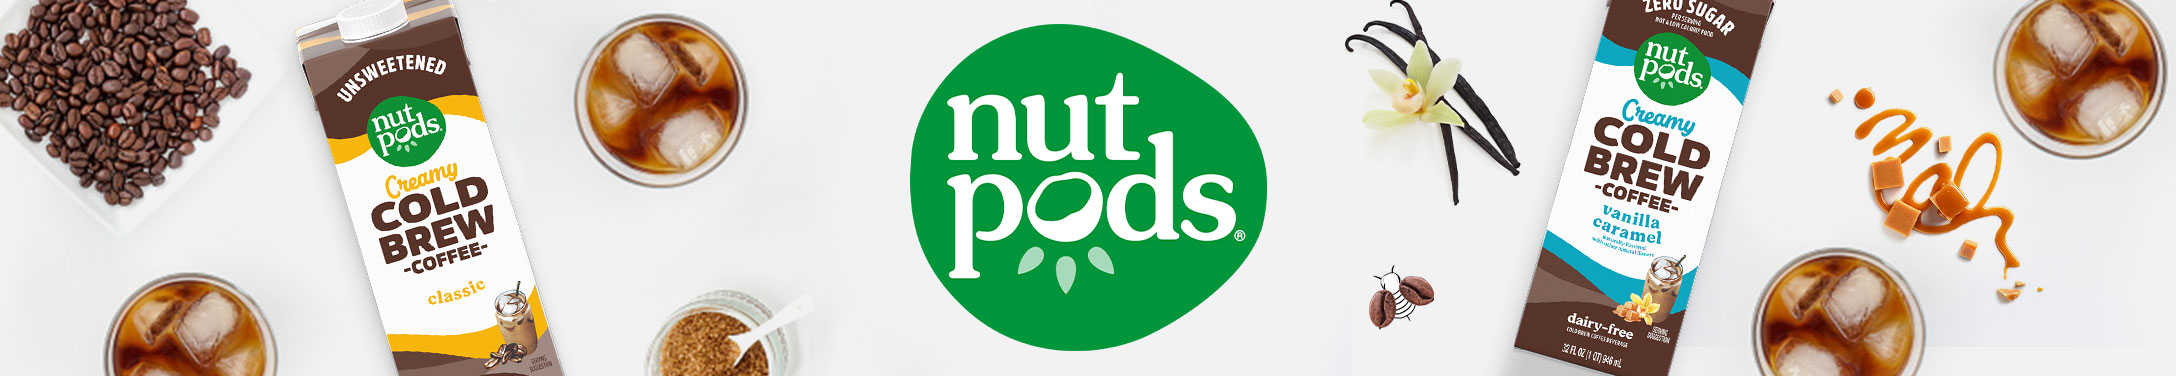 nutpods cold brew coffee varieties surrounding the logo